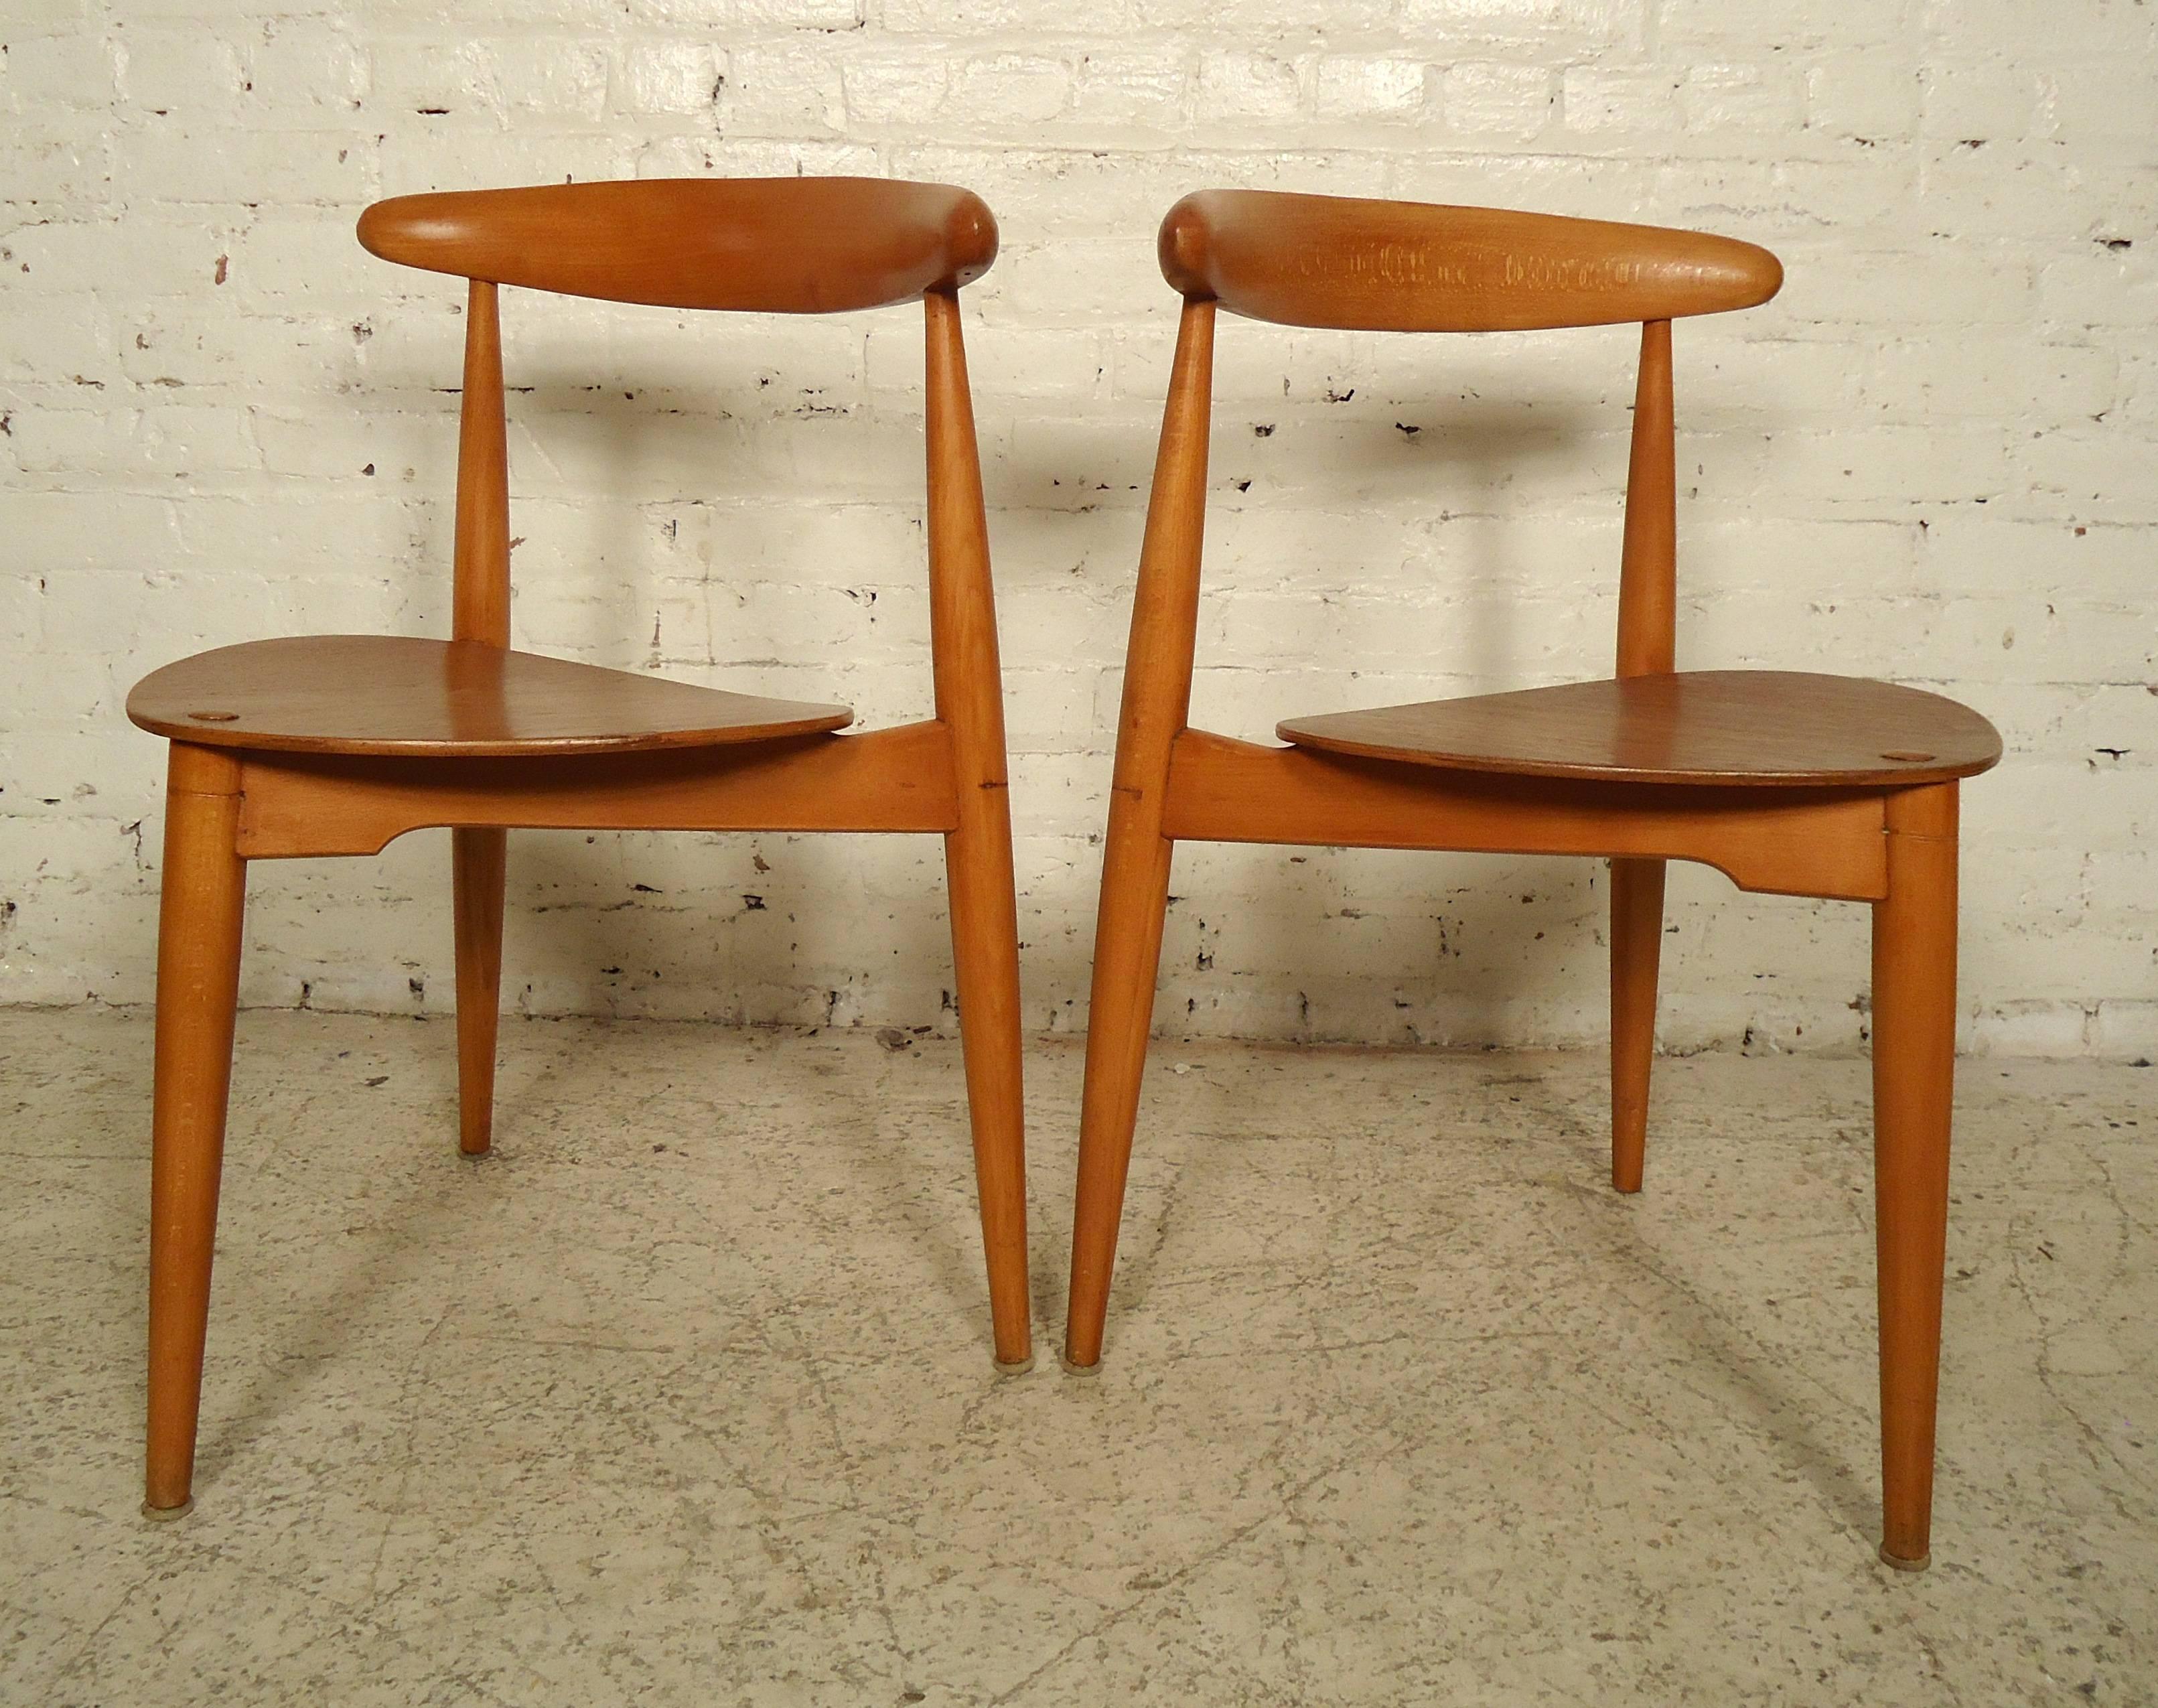 Mid-20th Century Set of Four Mid-Century Modern Chairs